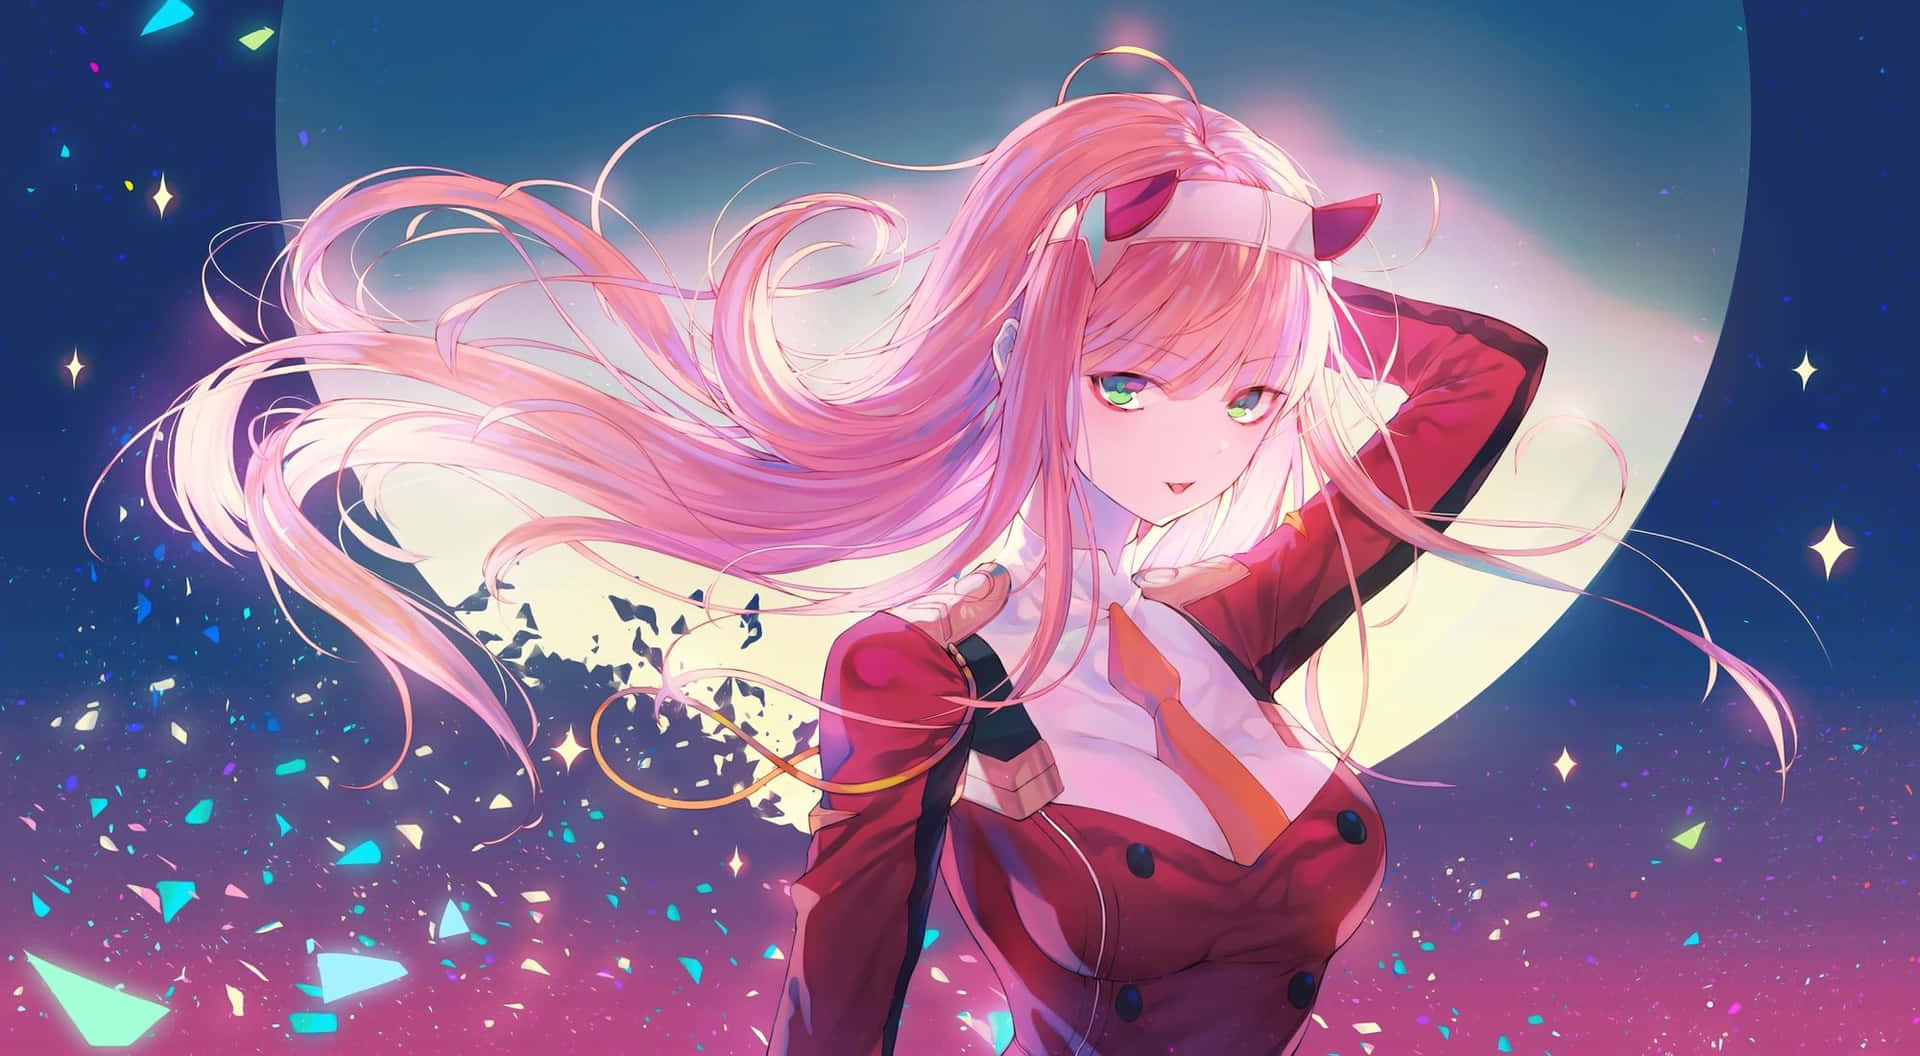 Zero Two Invites You to Come Fly with Her